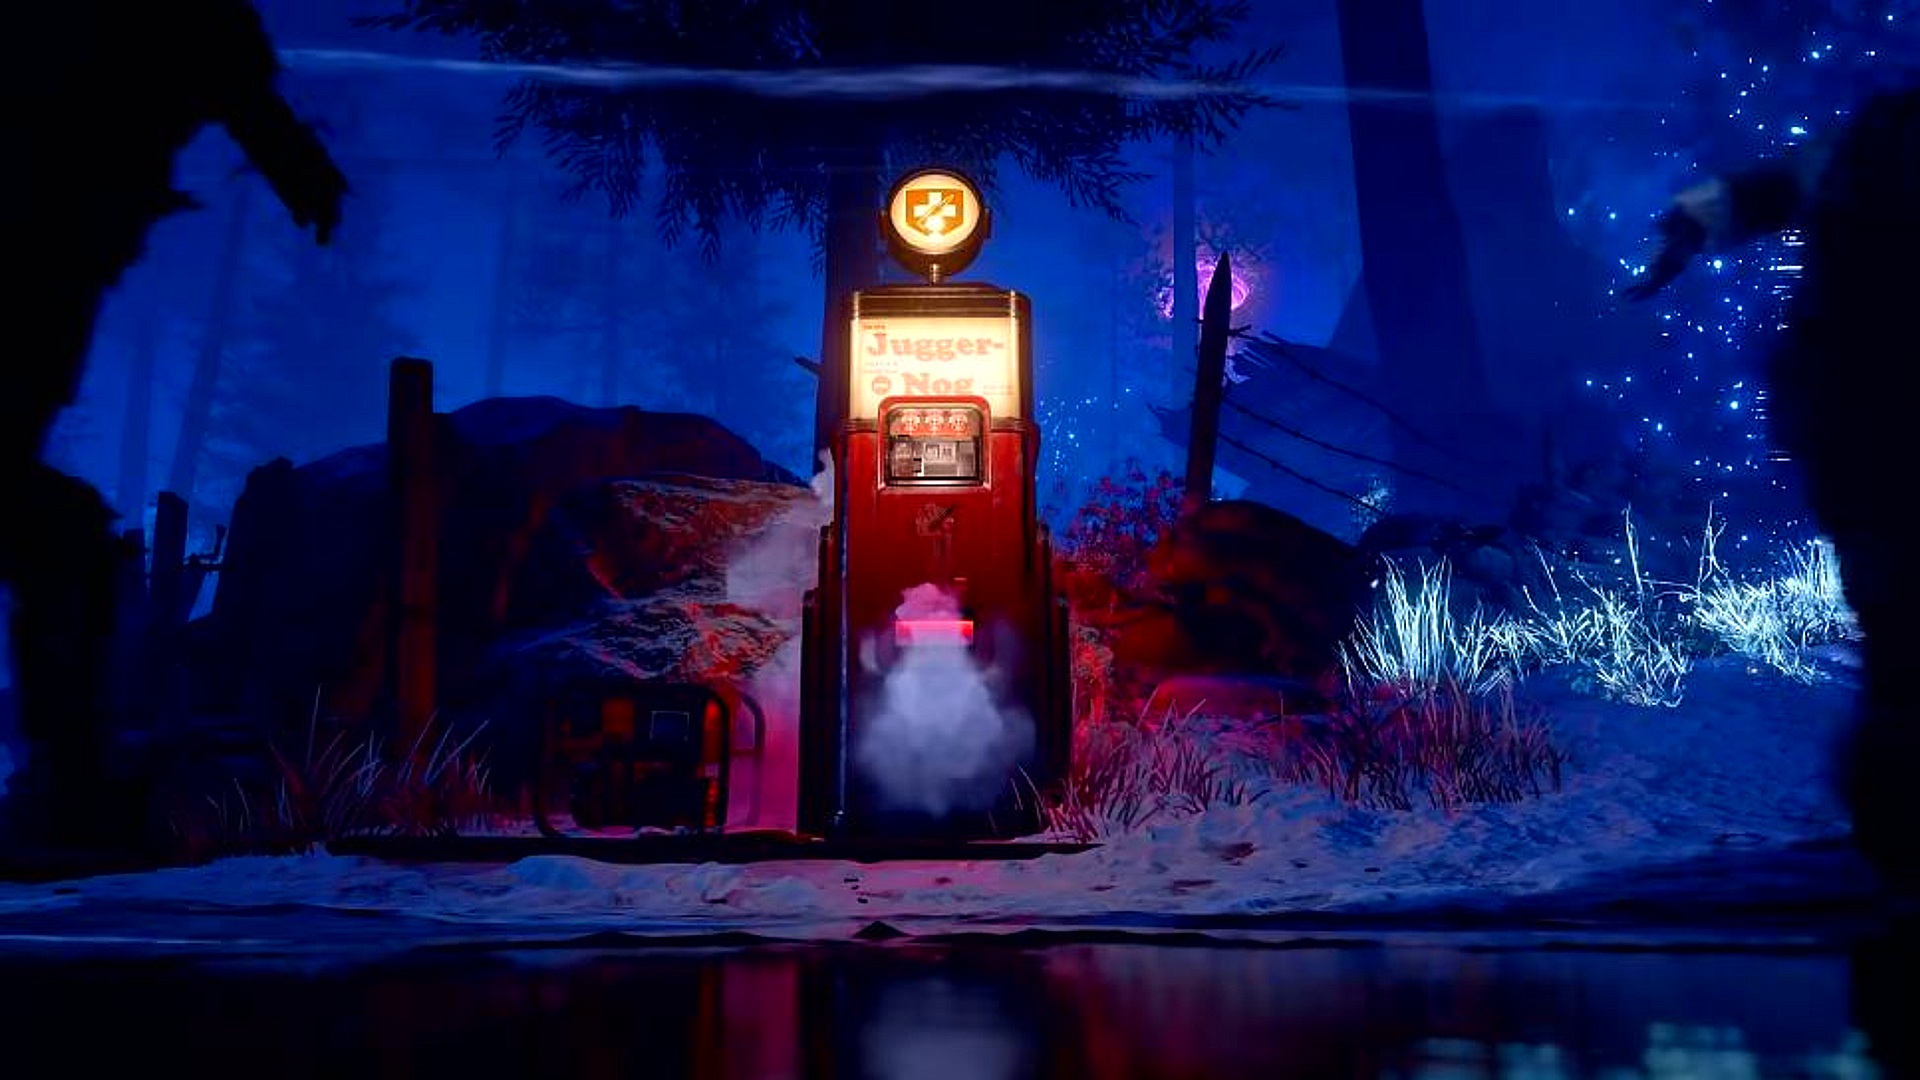 Call of Duty Black Ops Cold War Zombies Aetherium Crystals: The Juggernog perk vending machine next to a rock with a broken bared wire fence nearby.